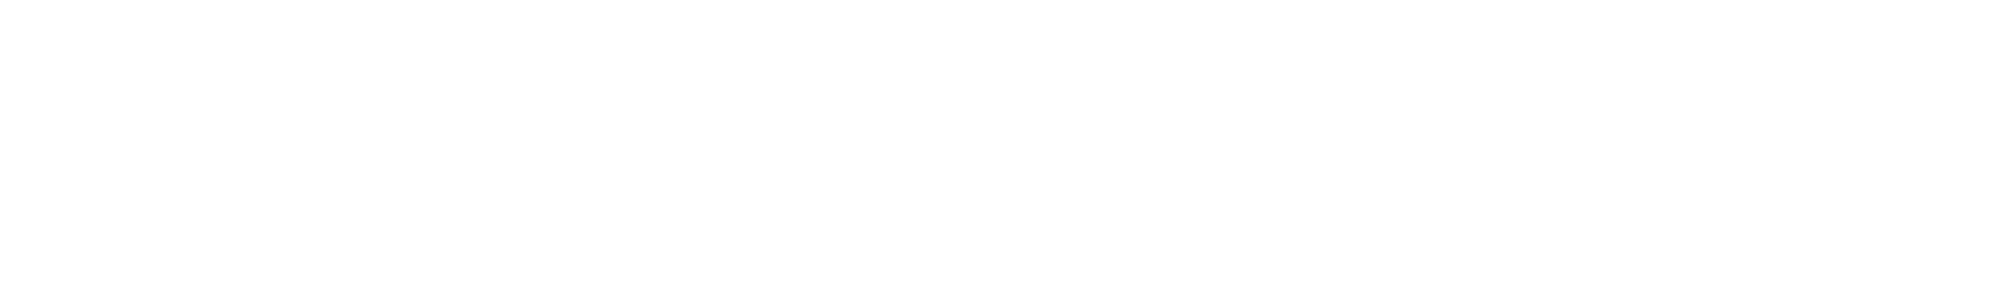 Black background with a white mathematical equation involving multiplication and summation resulting in the number 32